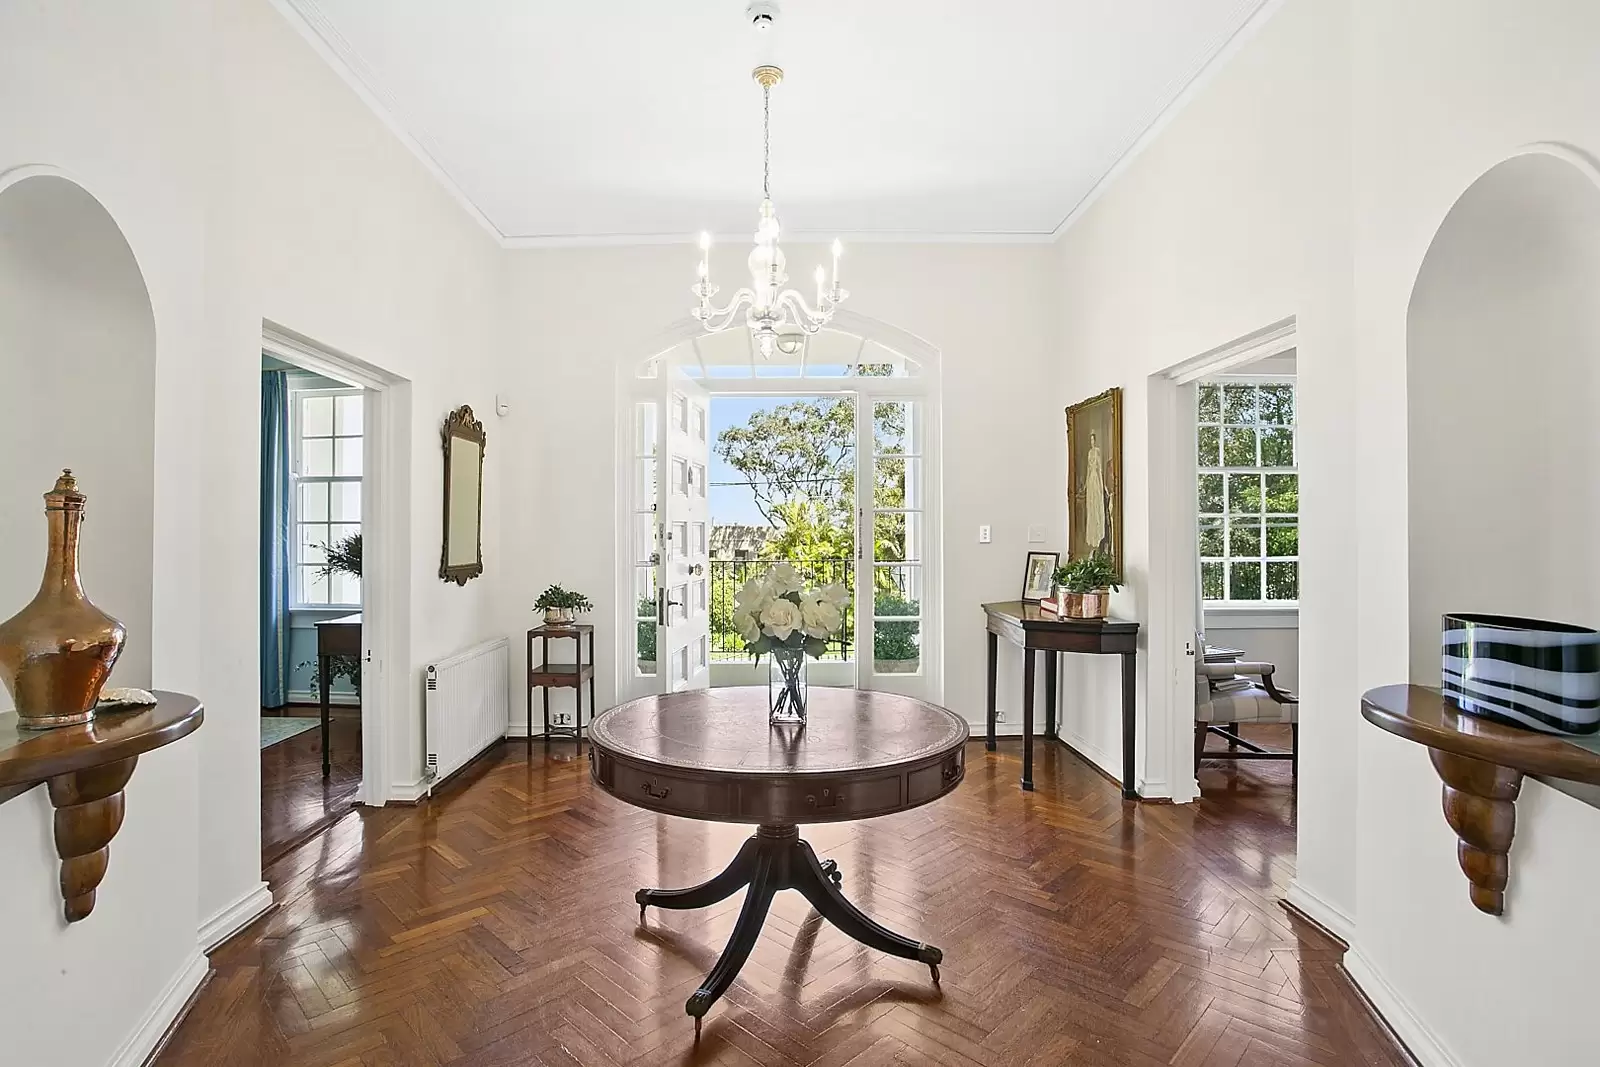 Photo #5: 25 Gilliver Avenue, Vaucluse - Sold by Sydney Sotheby's International Realty